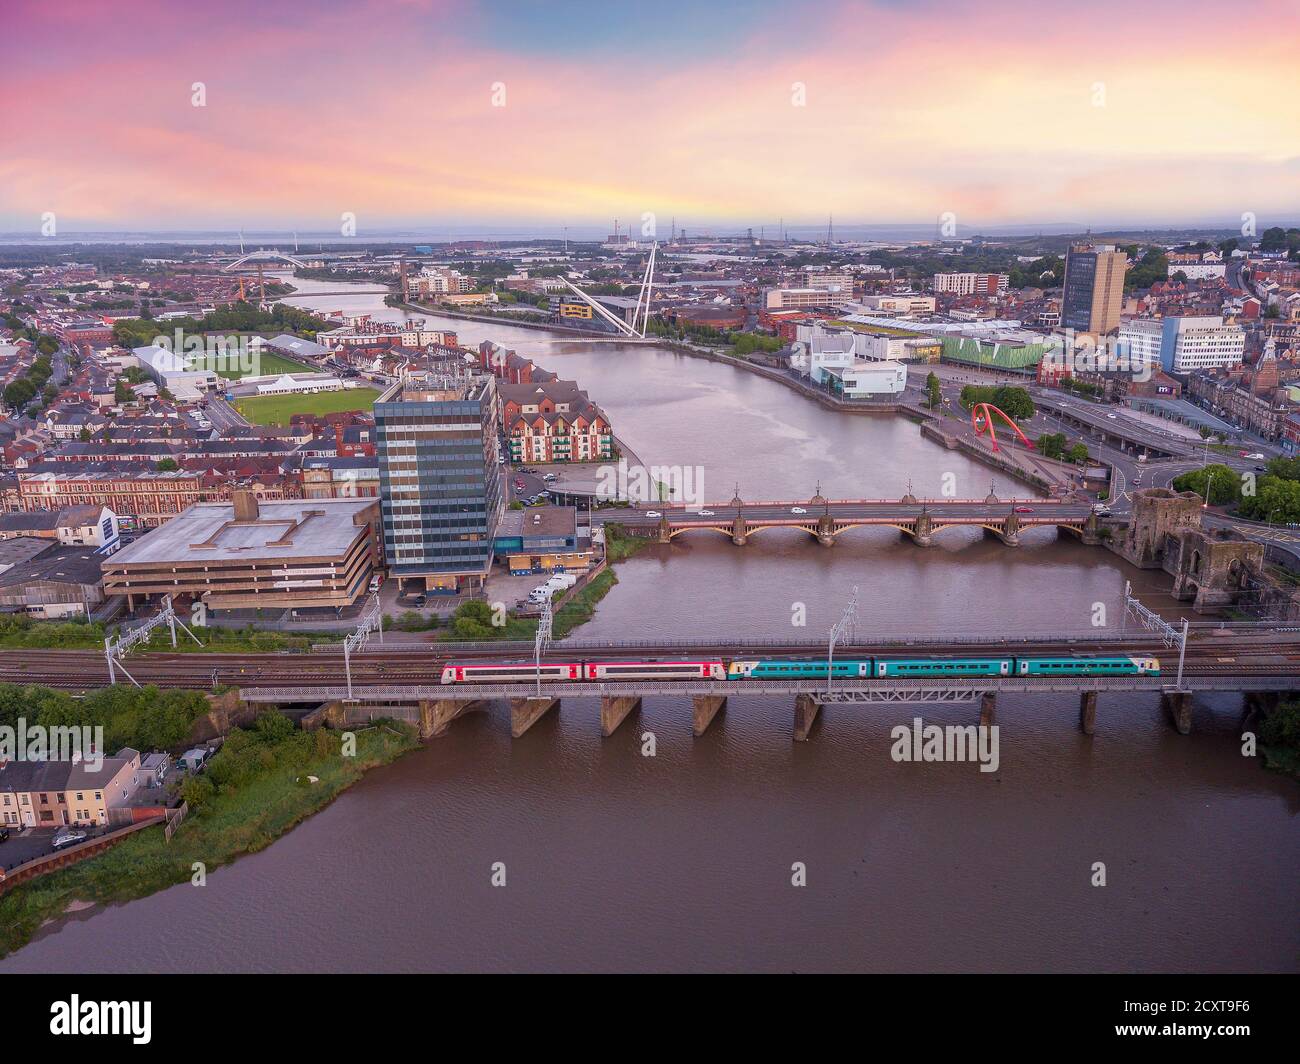 Sunset over Newport Wales, city aerial panorama Stock Photo